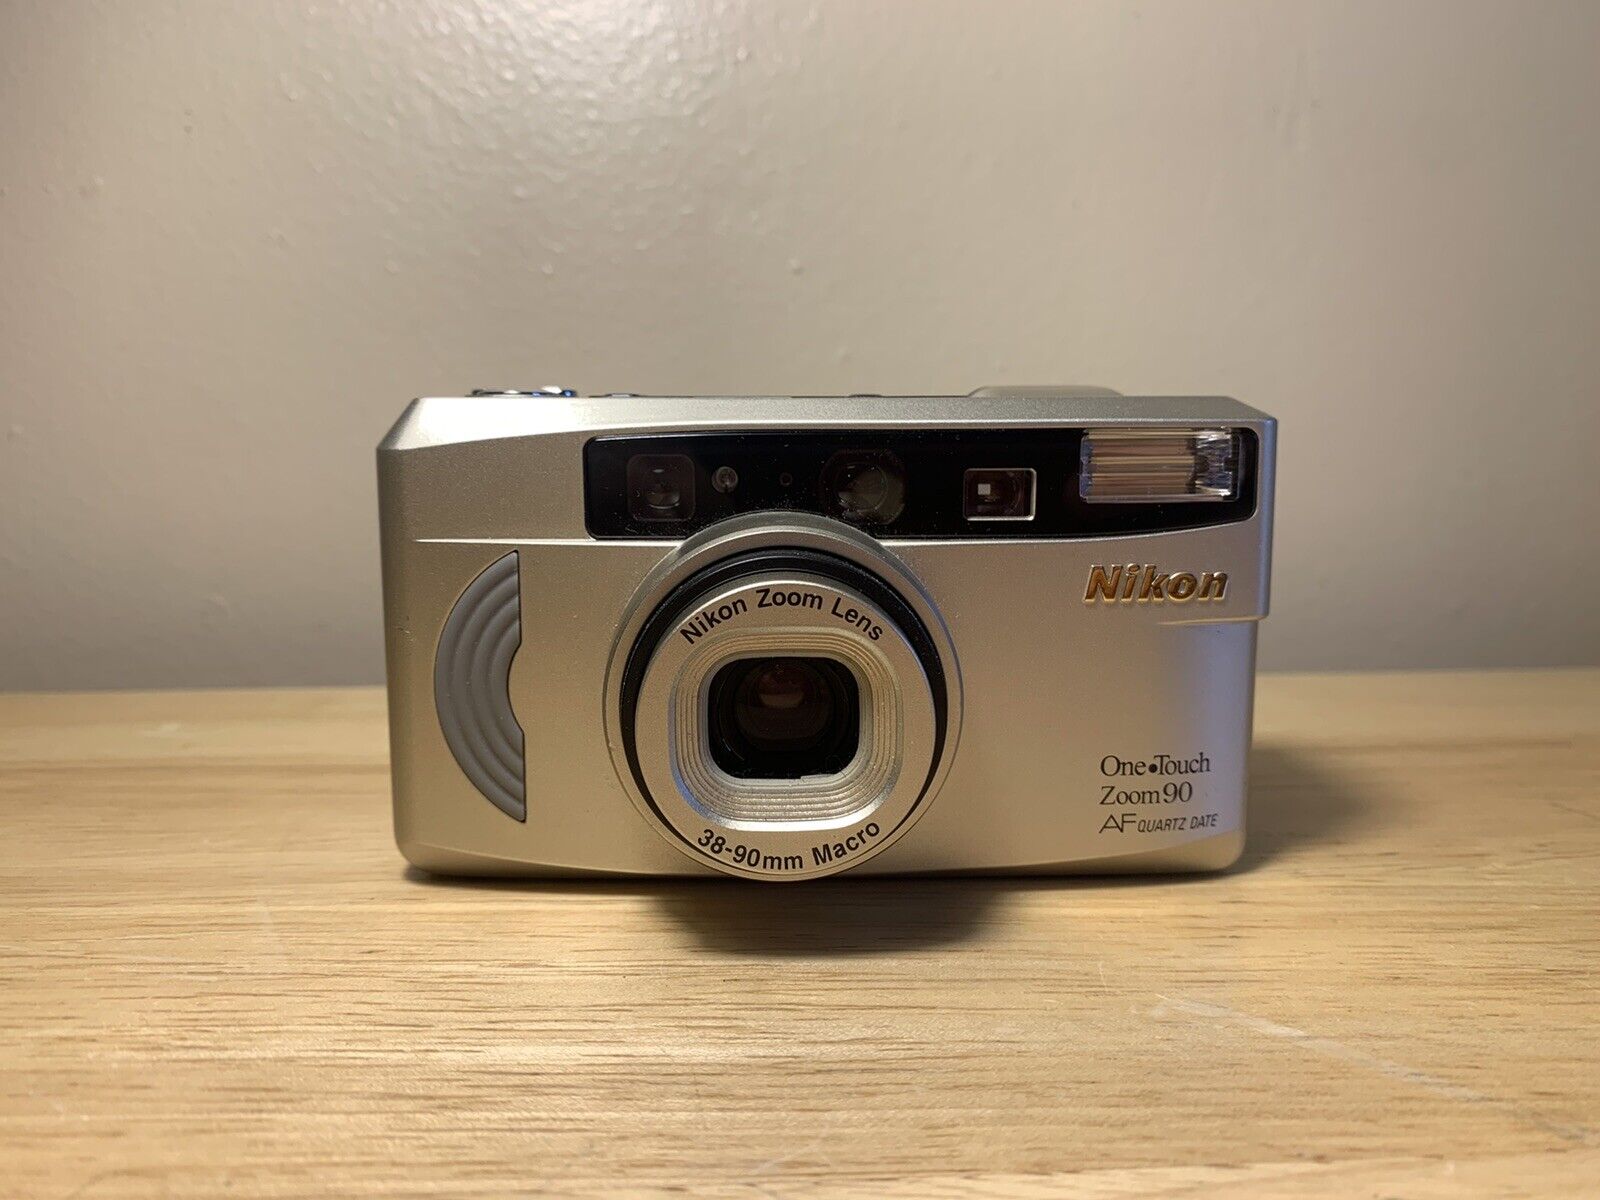 Nikon One Touch Zoom 90 35mm Point & Shoot Camera